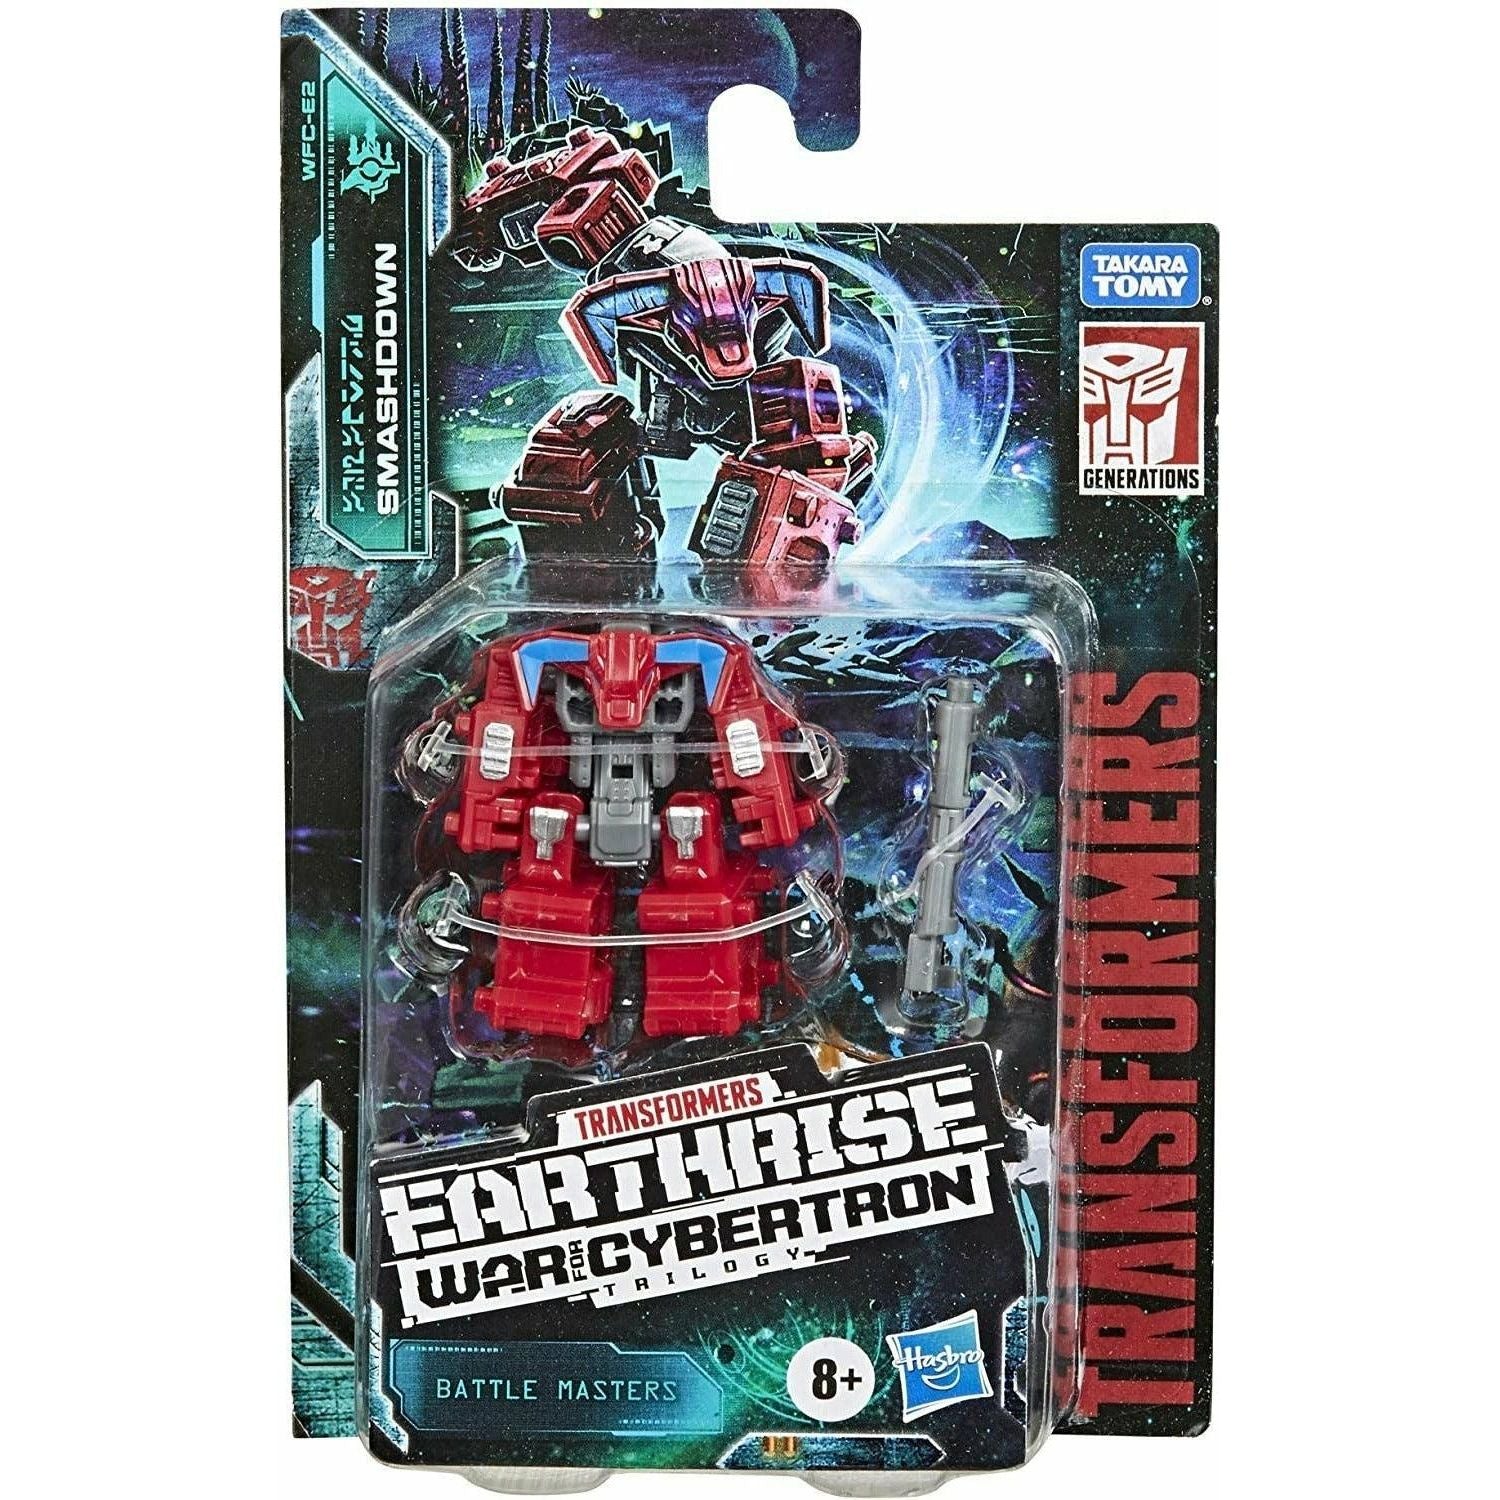 Transformers Earthrise War for Cybertron Trilogy Smashdown WFC-E2 Hammer - BumbleToys - 8+ Years, Boys, Figures, OXE, Transformers